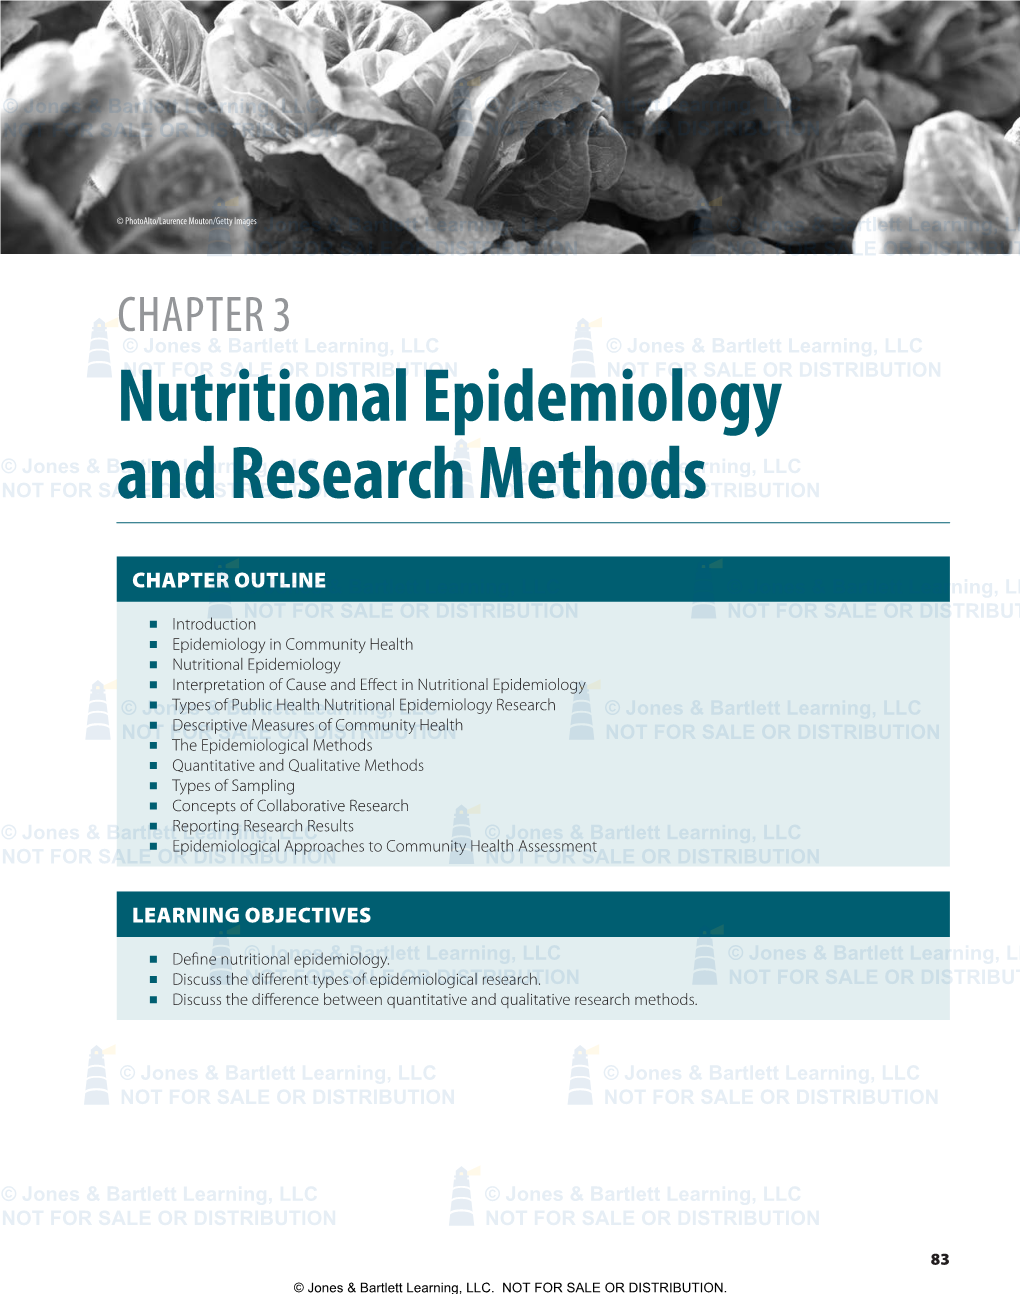 Nutritional Epidemiology and Research Methods